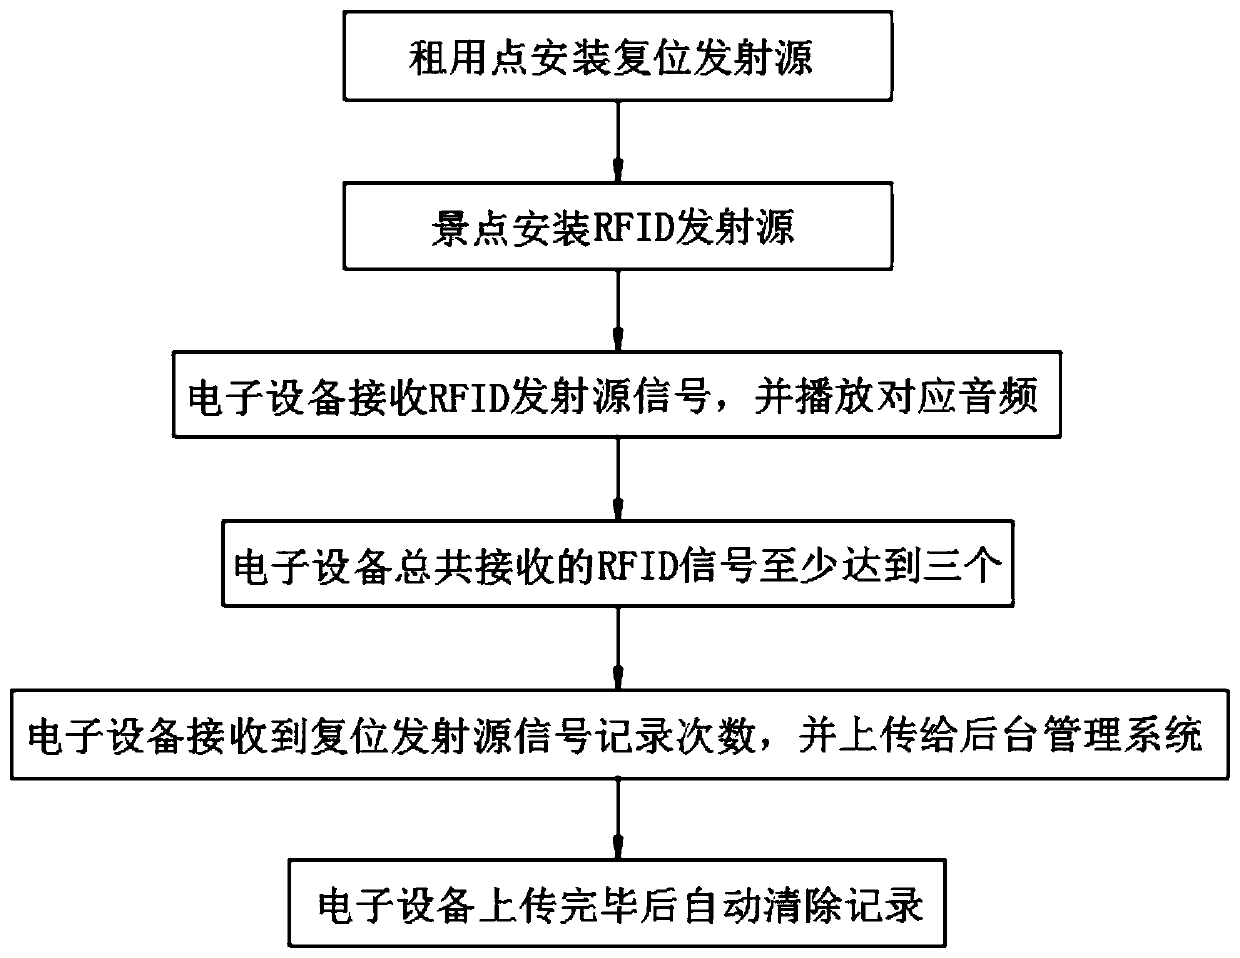 Calculation method of leased electronic equipment